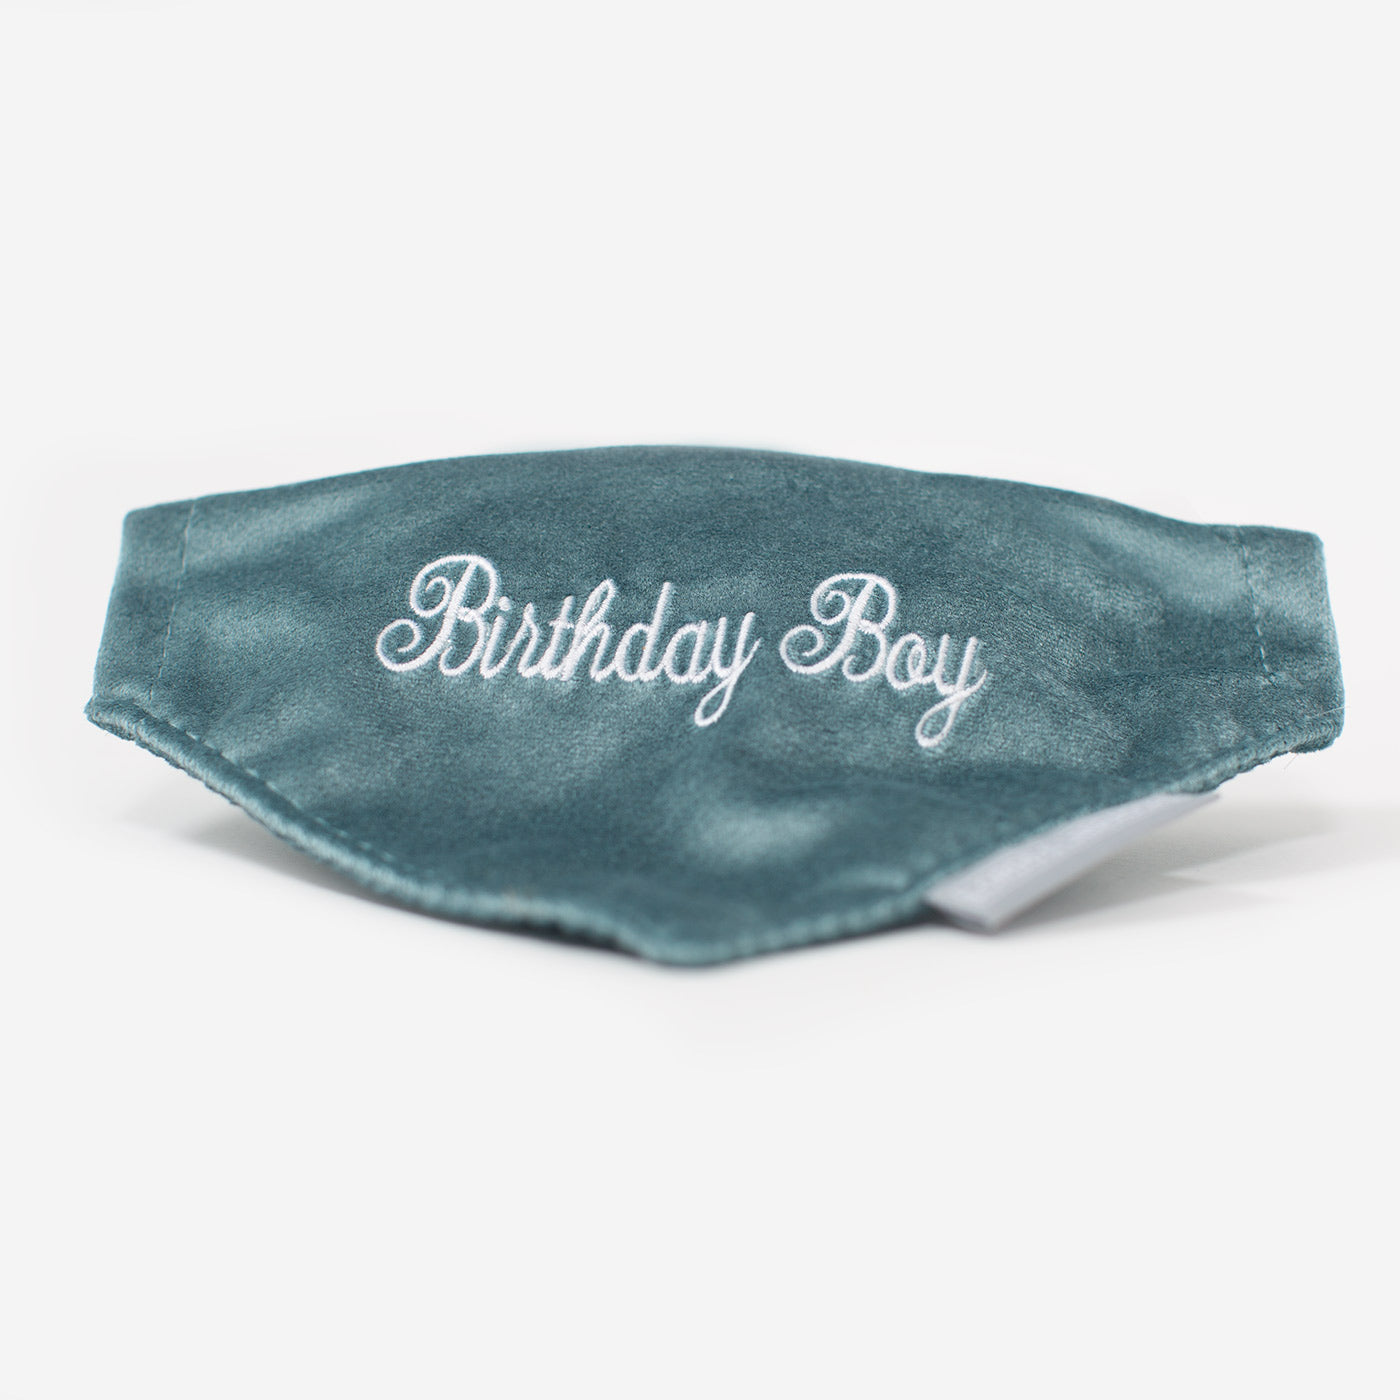 [colour:birthday boy] Present The Perfect Pet Playtime With Our Luxury 'Birthday Boy' Dog Bandana, In Stunning Duck Egg Velvet! Available Now at Lords & Labradors US